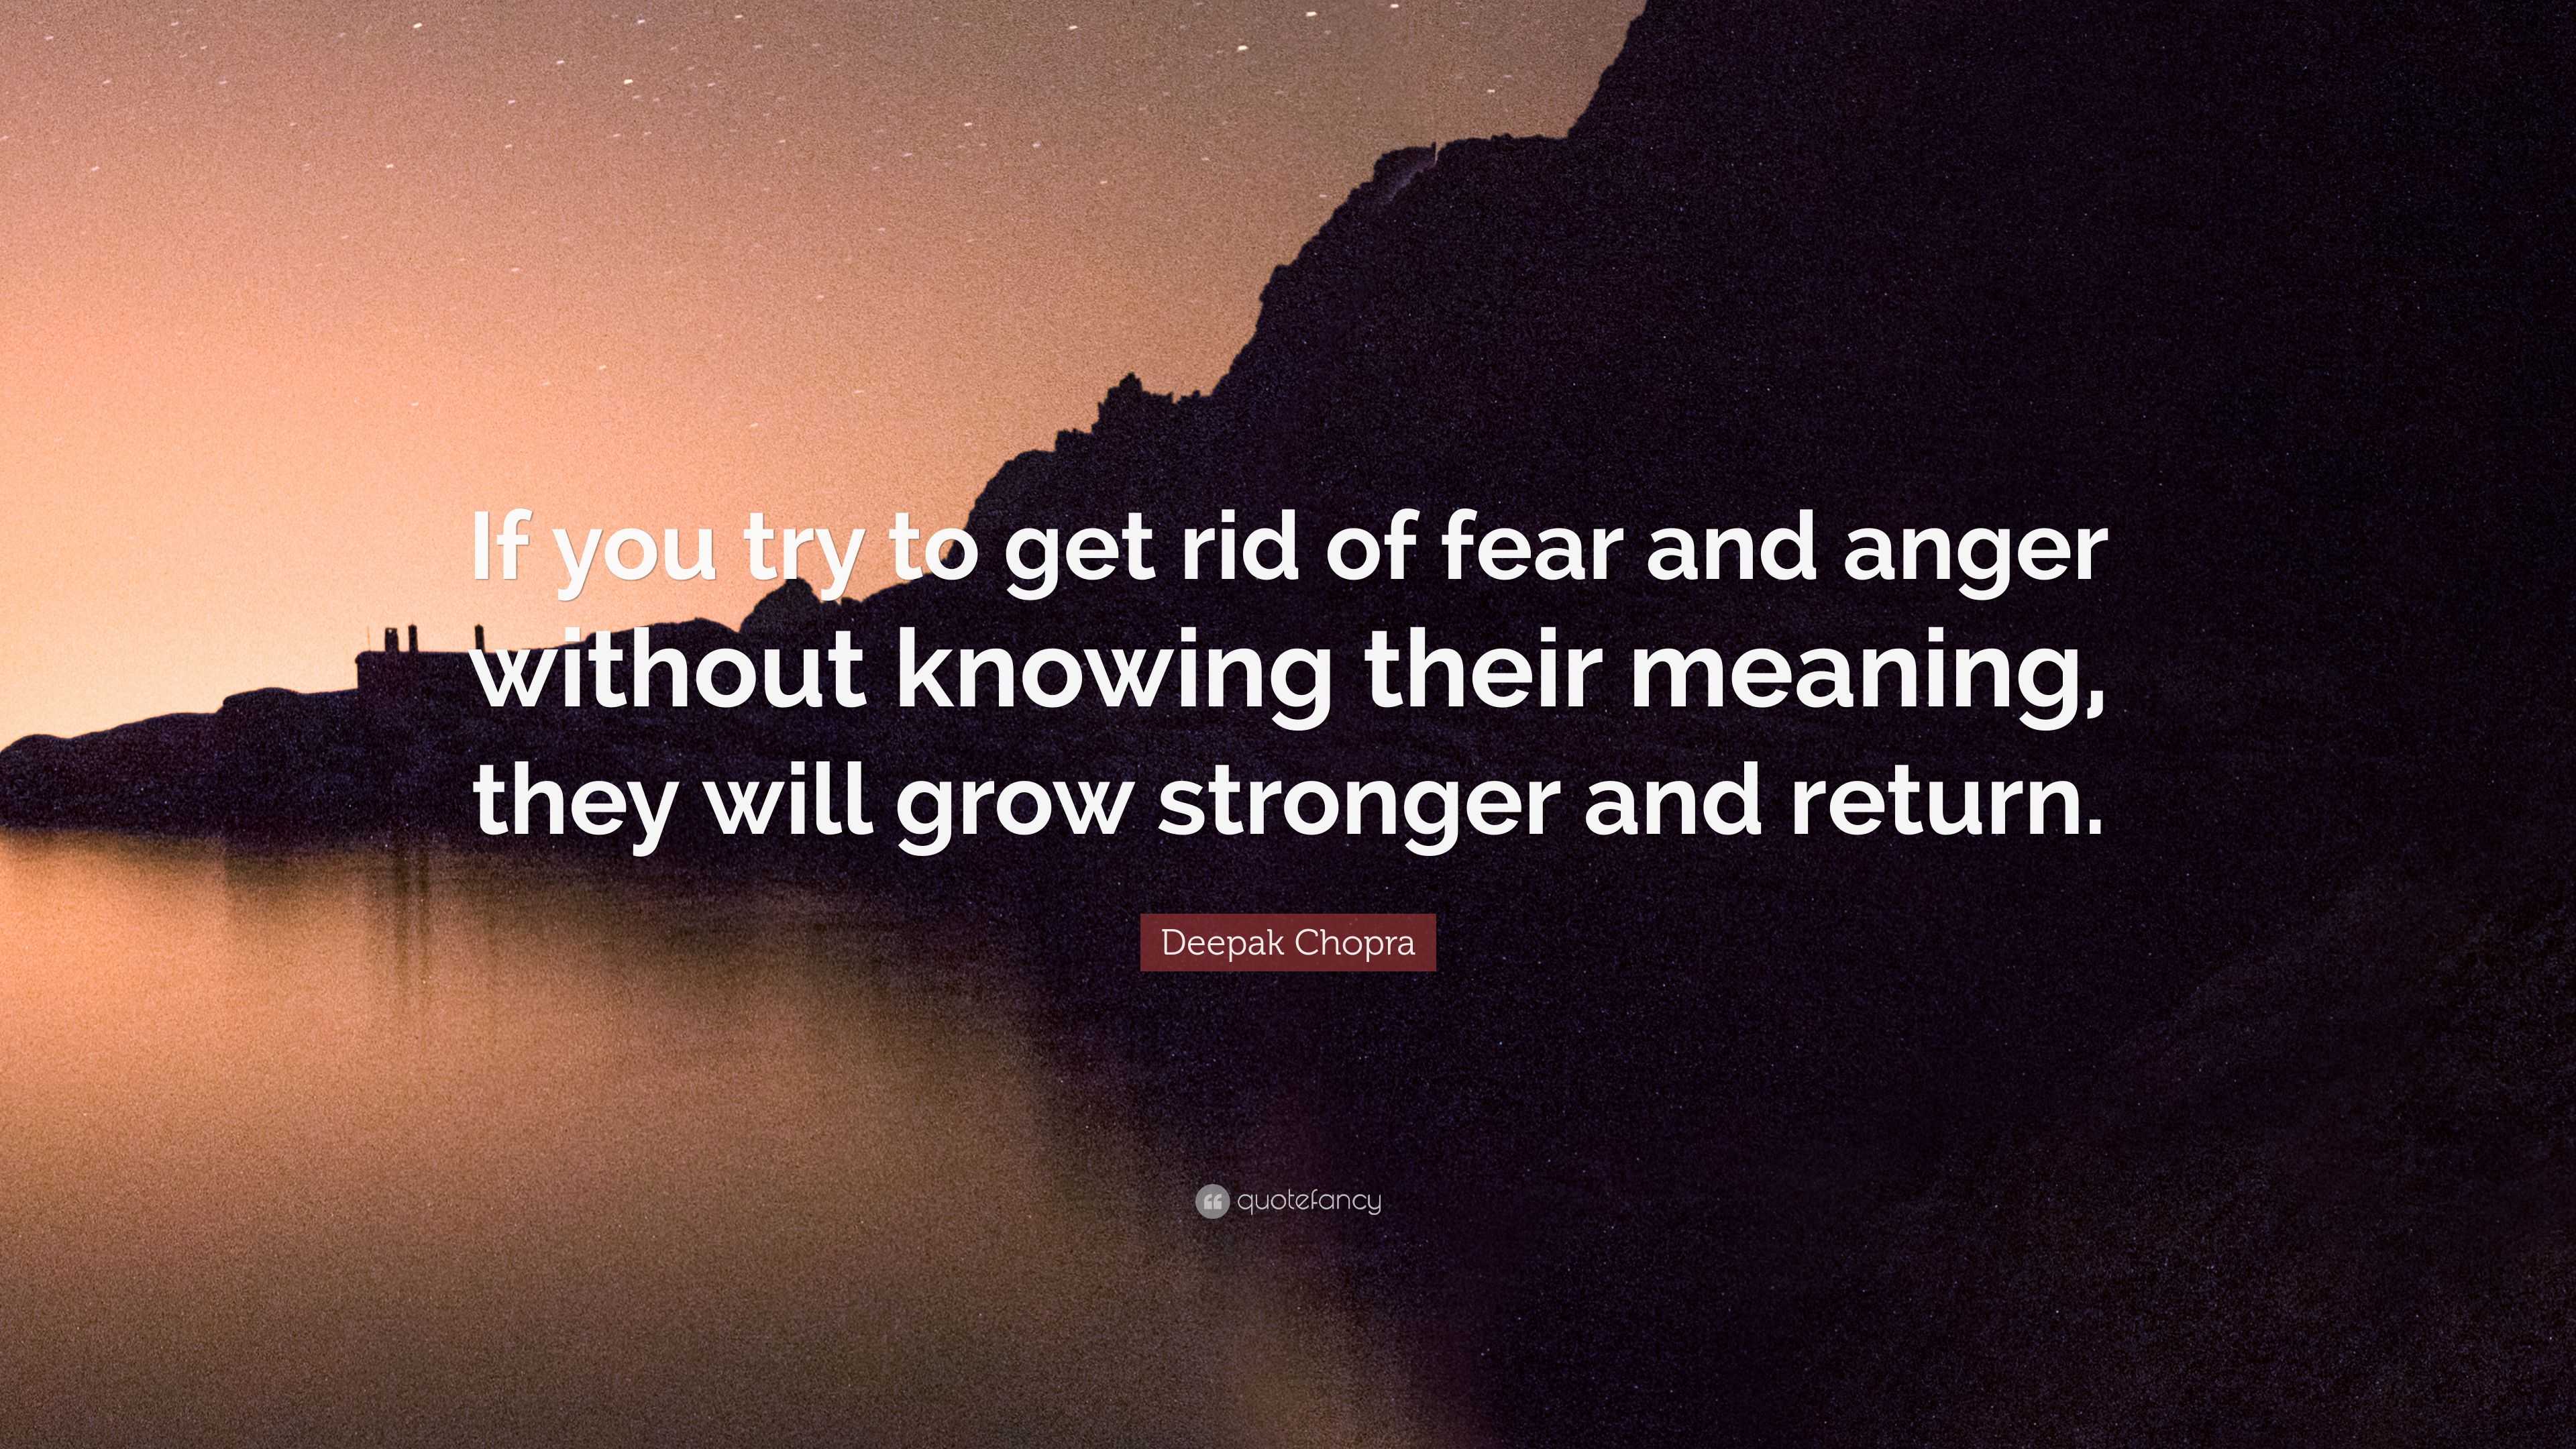 Deepak Chopra - Do you get angry too easily? This quote is from my